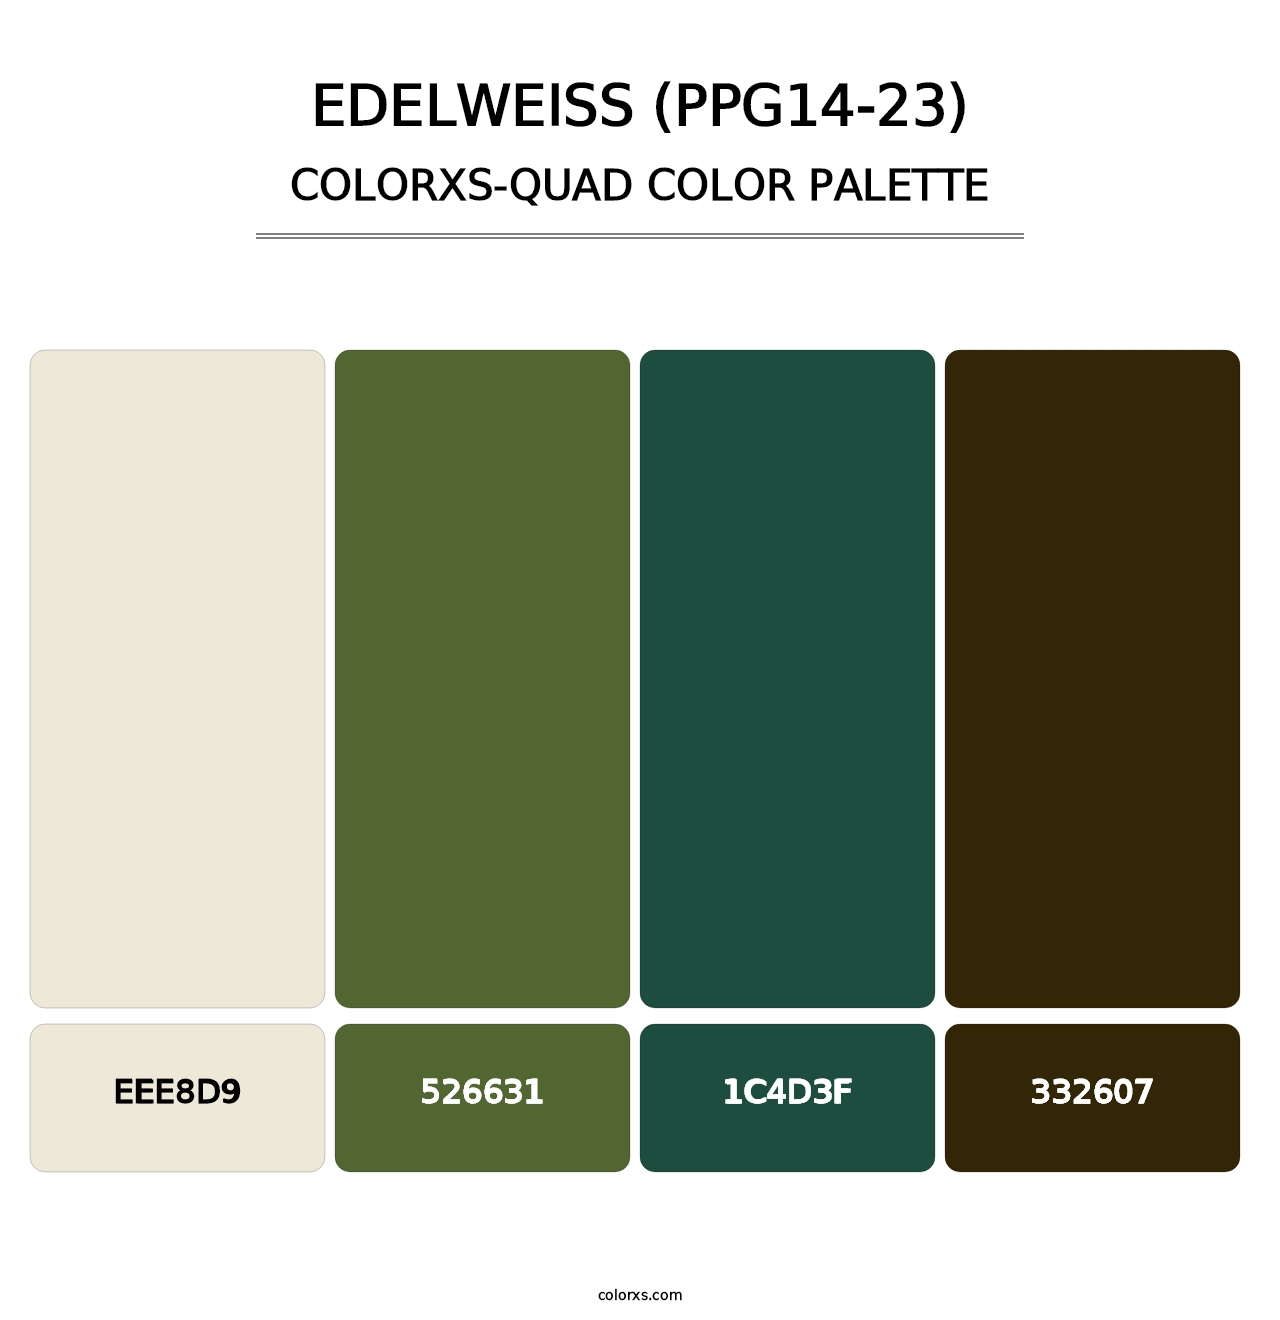 Edelweiss (PPG14-23) - Colorxs Quad Palette